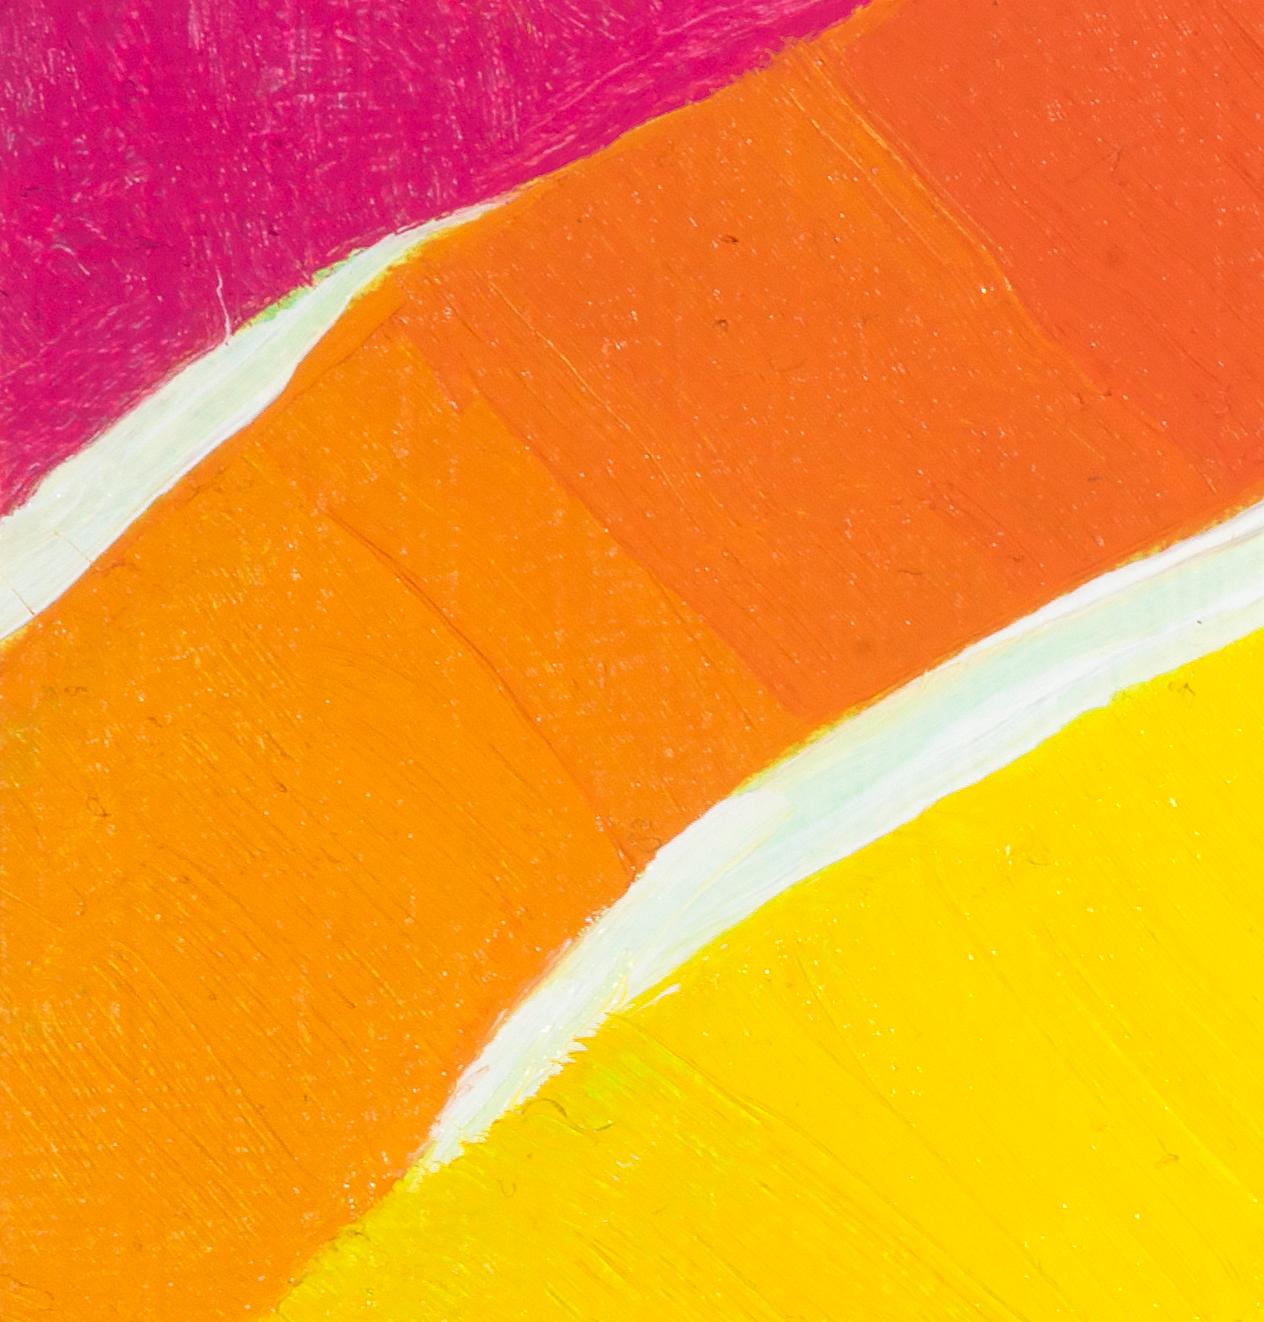 Imua: abstract painting w/ blue green yellow orange pink lines on white - Abstract Painting by Paula Cahill